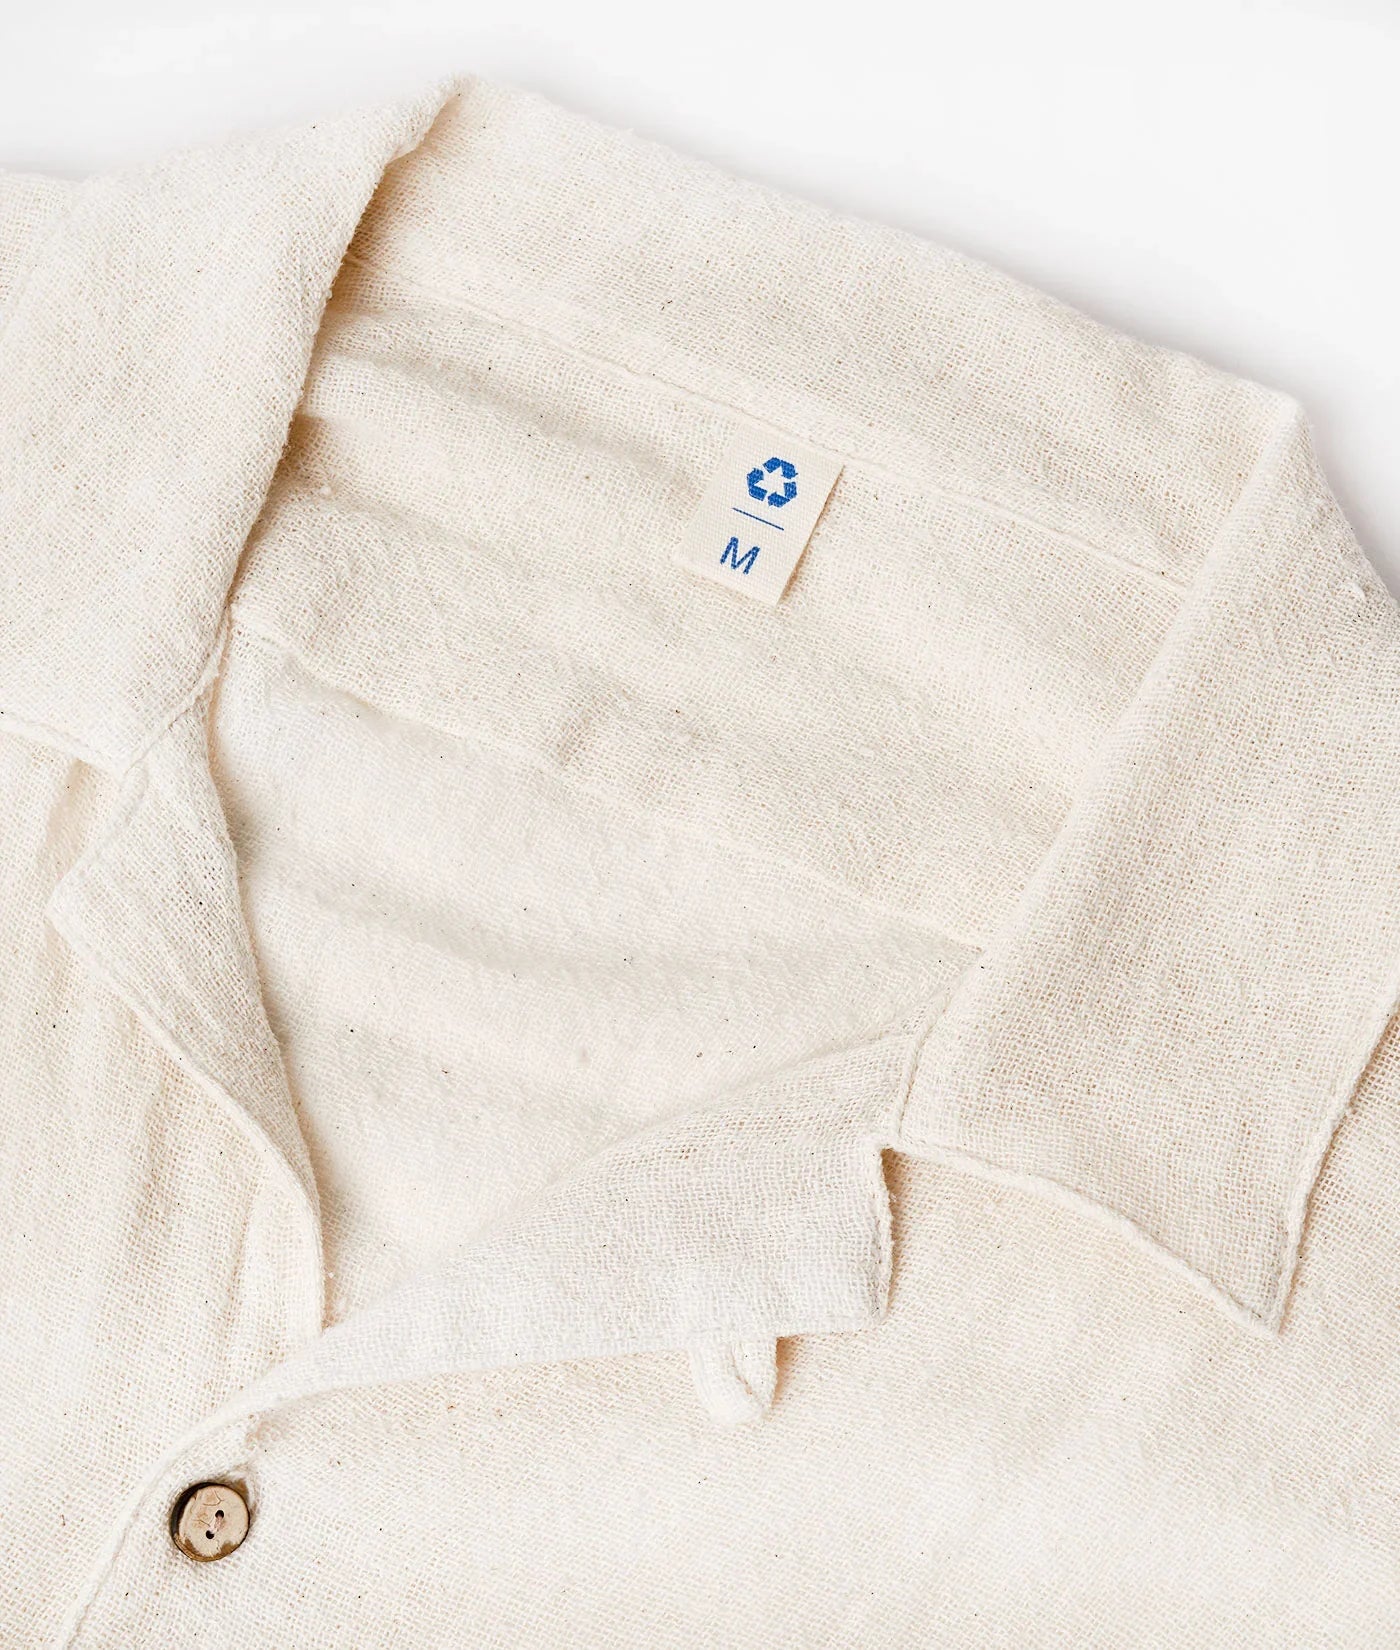 Industry of All Nations New Camp Shirt, Undyed